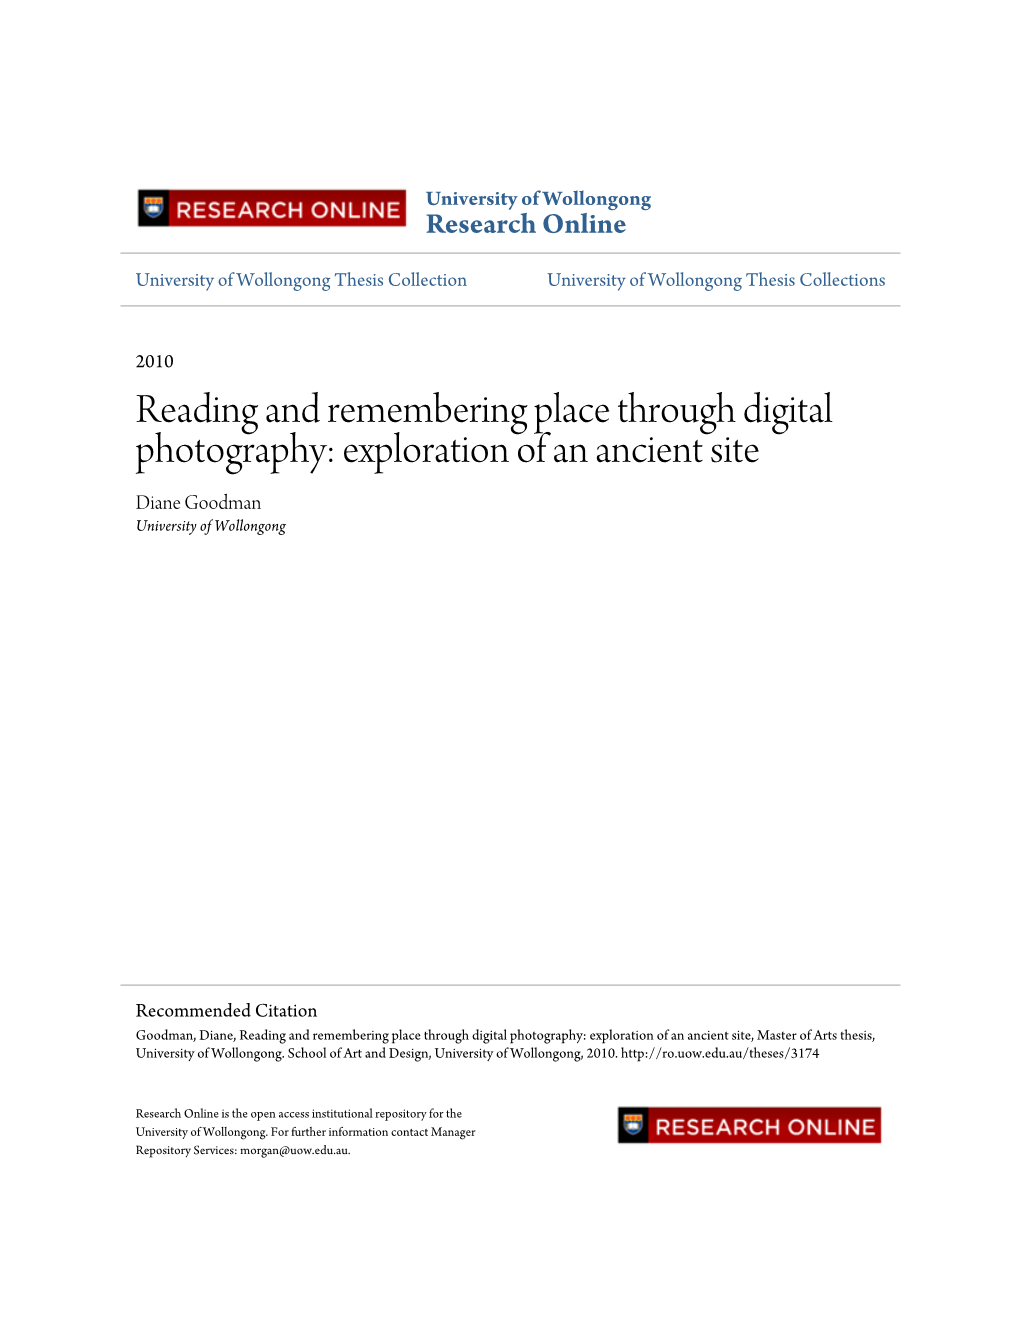 Reading and Remembering Place Through Digital Photography: Exploration of an Ancient Site Diane Goodman University of Wollongong